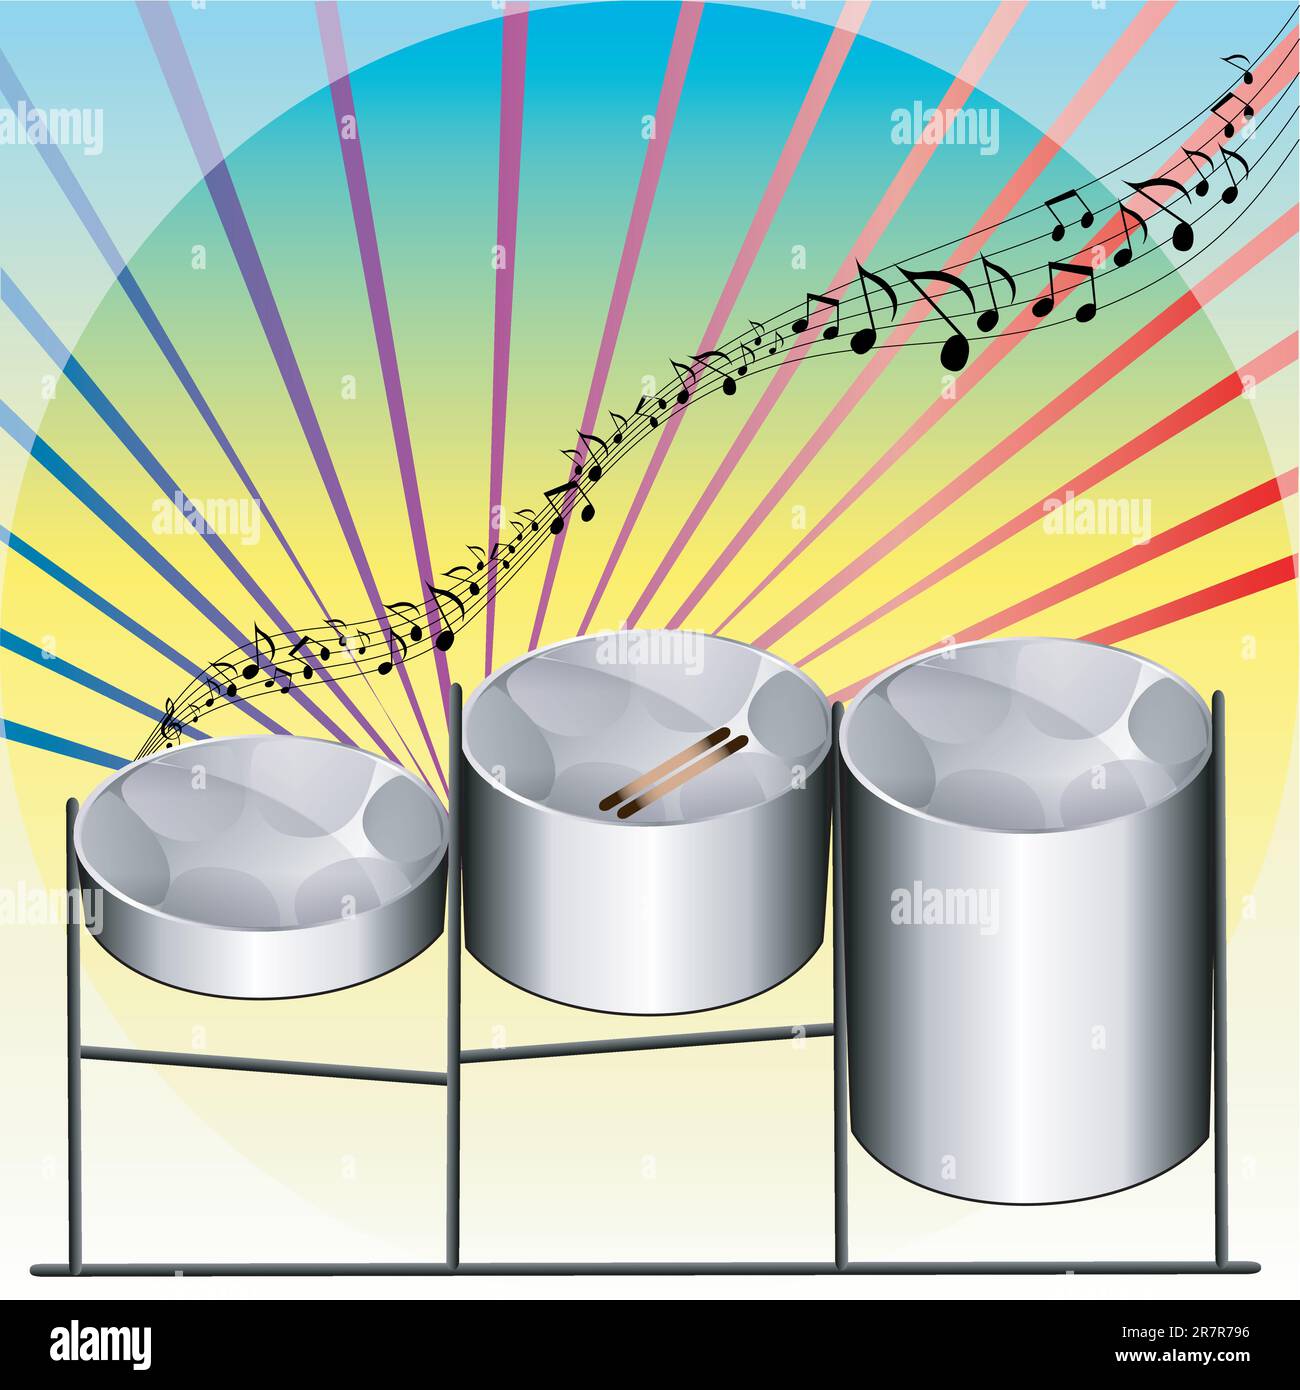 Vector Illustration of three variations of Steel Pan Drums invented in Trinidad and Tobago. Stock Vector